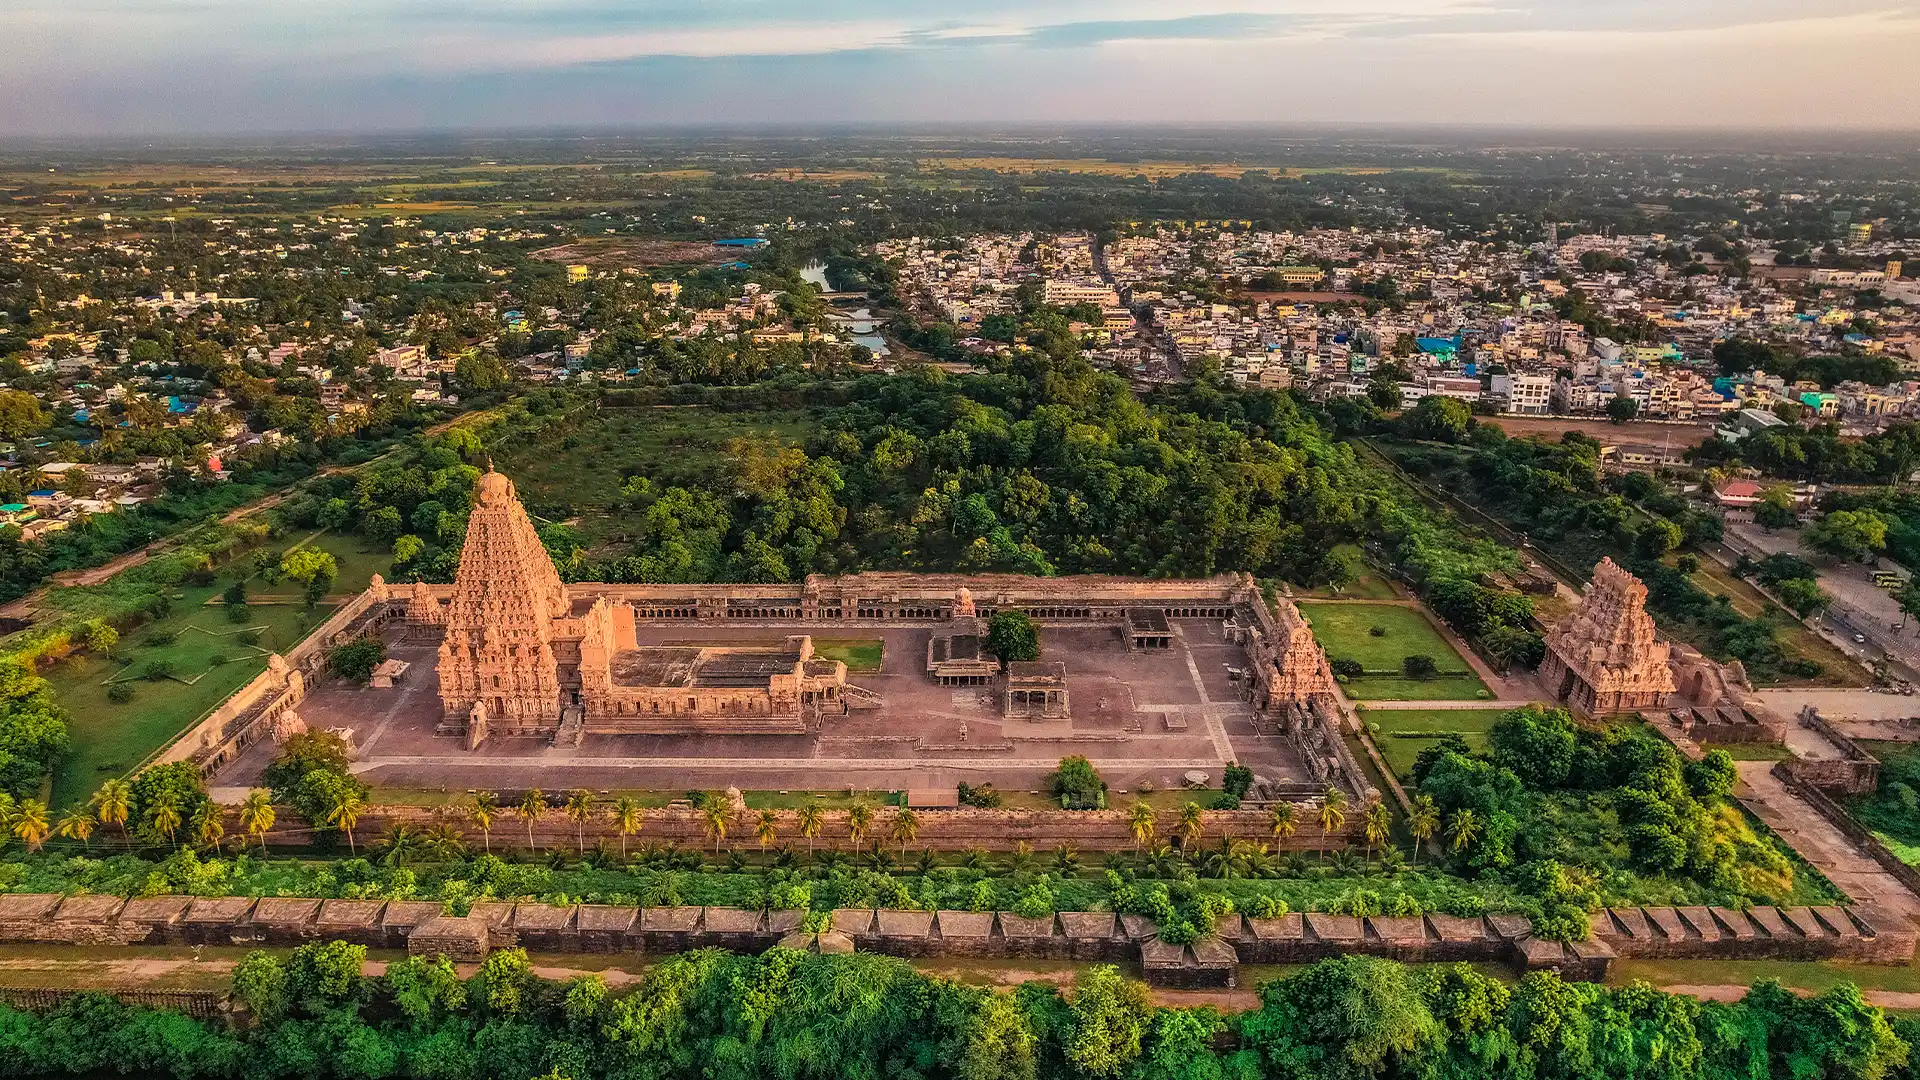 Discover the divine at Thanjavur